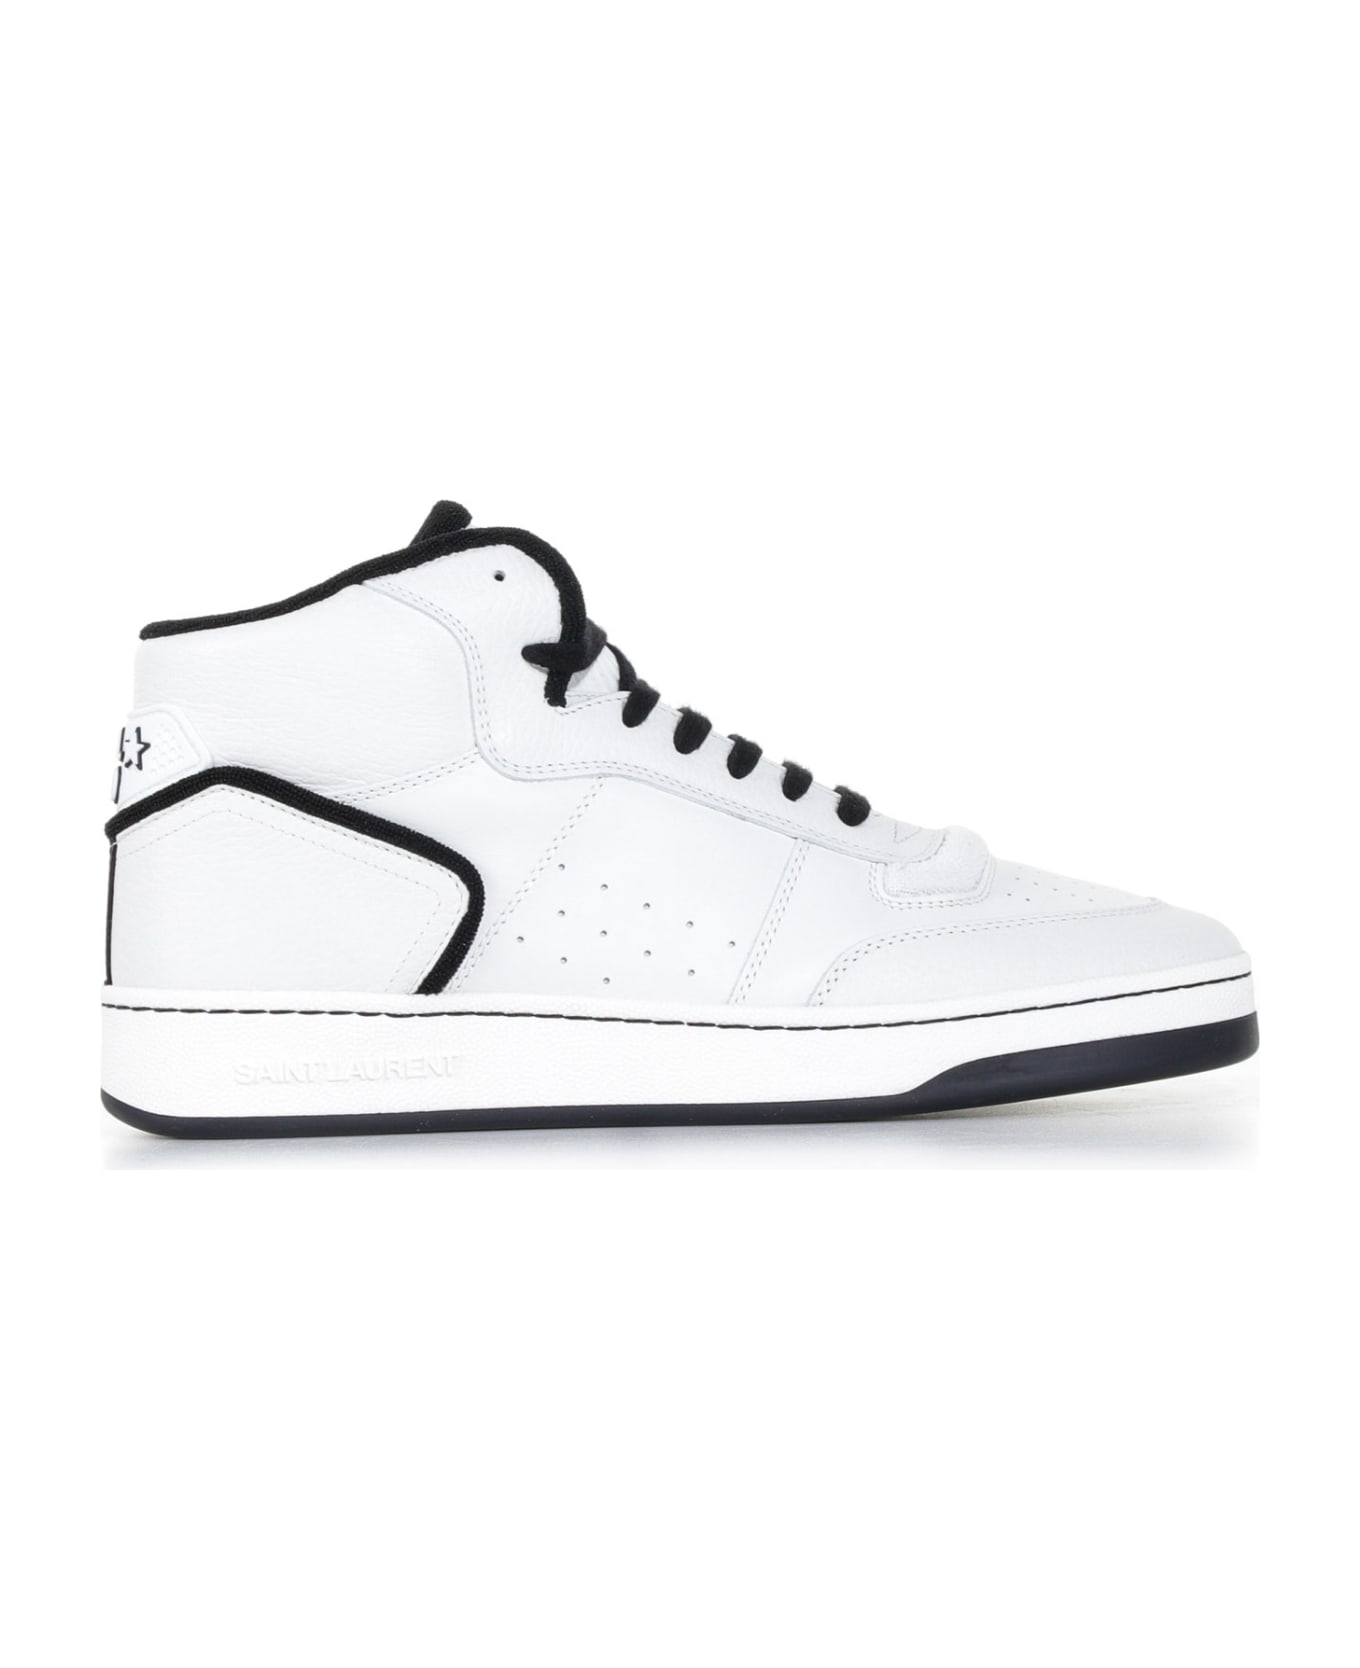 Saint Laurent Sneakers With Contrasting Details - BLANC OPT